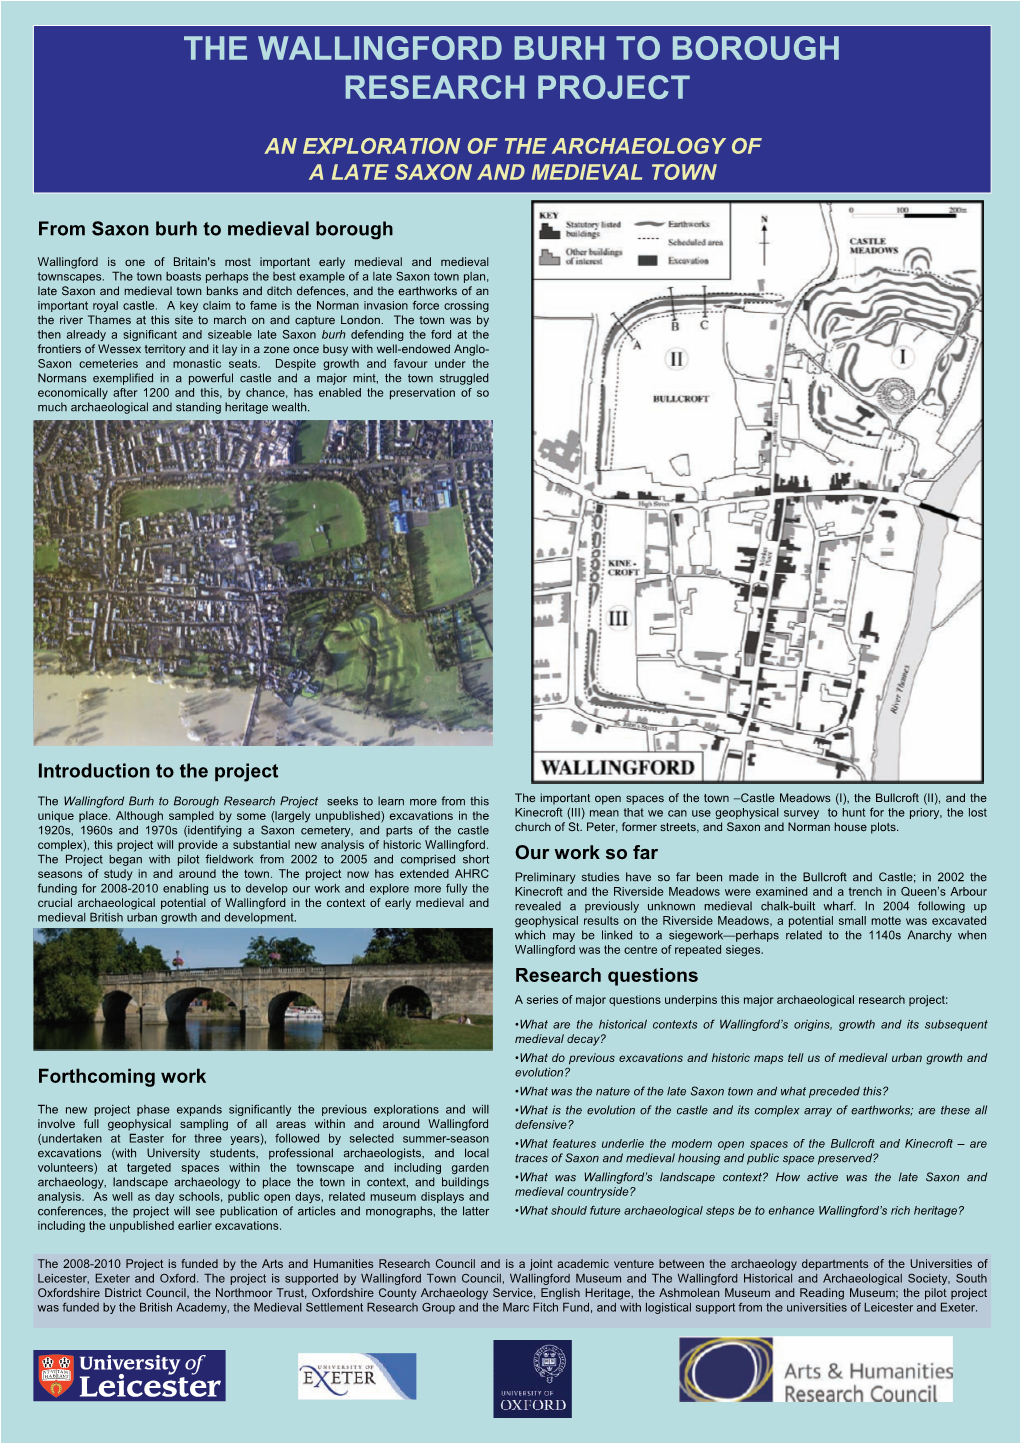 The Wallingford Burh to Borough Research Project